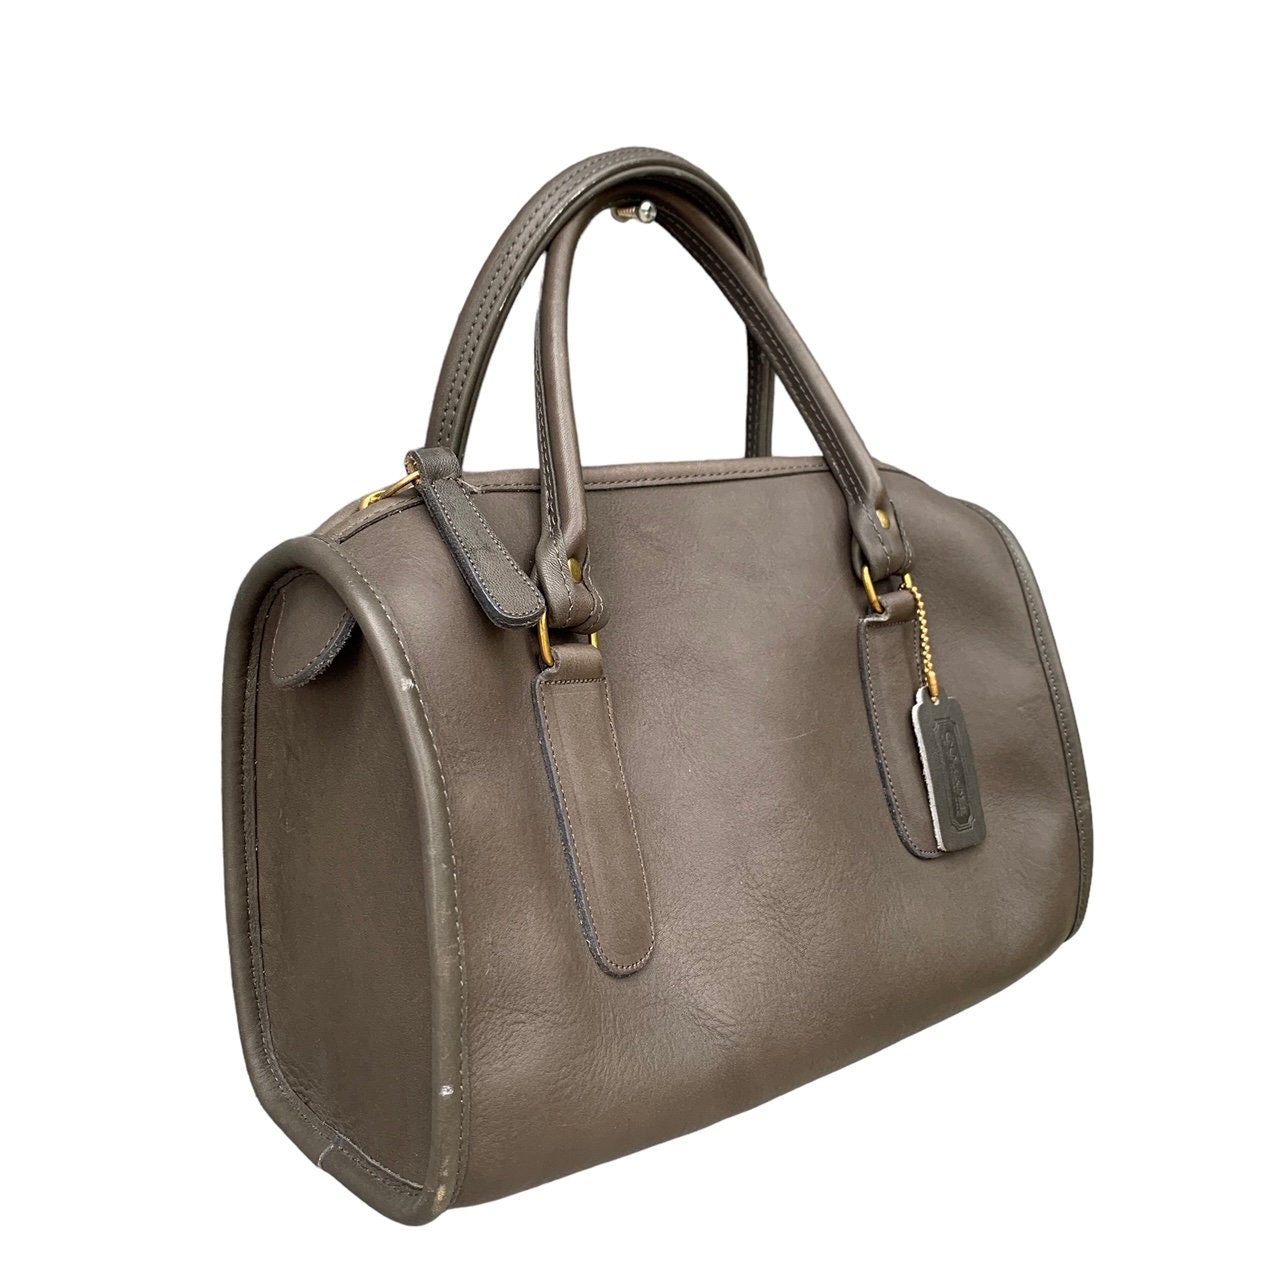 Coach small doctors bag inspired - JLT Fashion Collection